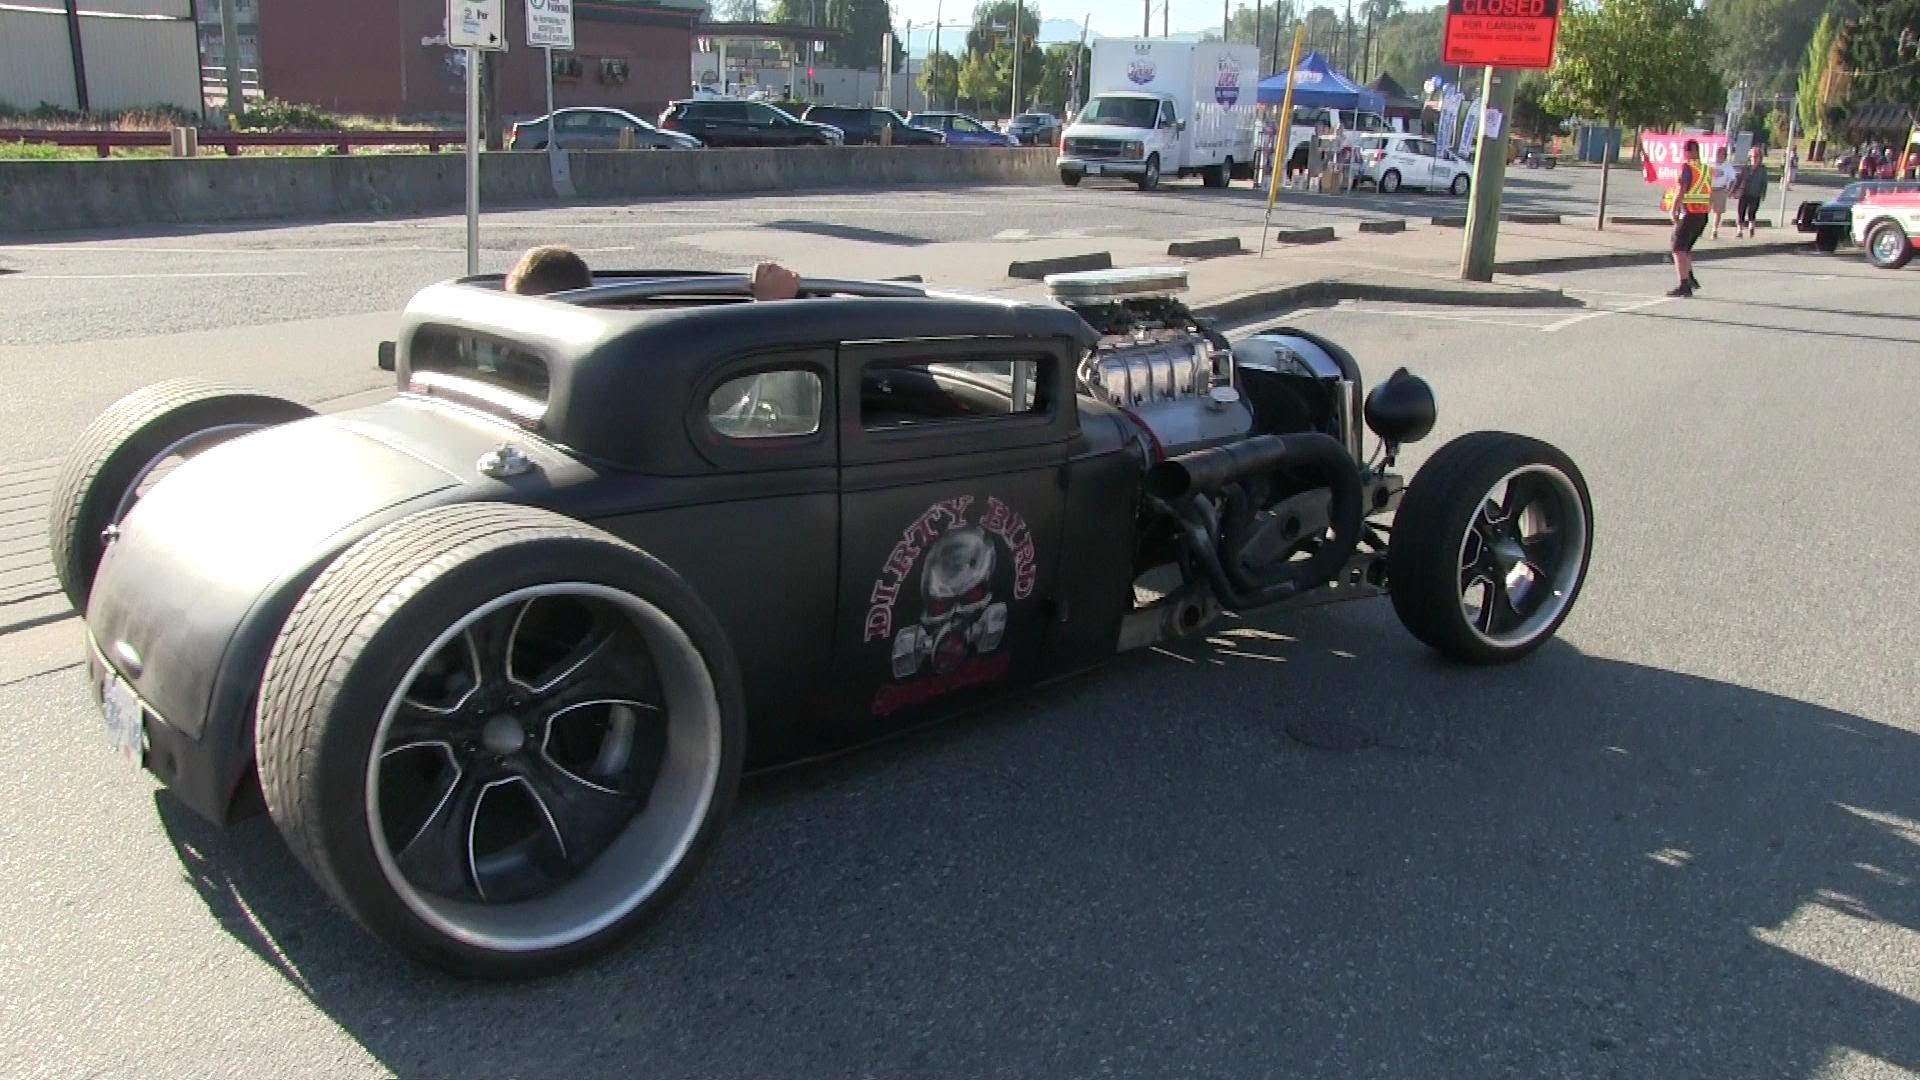 Bad ass Hot Rod spotted on the street,bad ass sound of rat rod ...